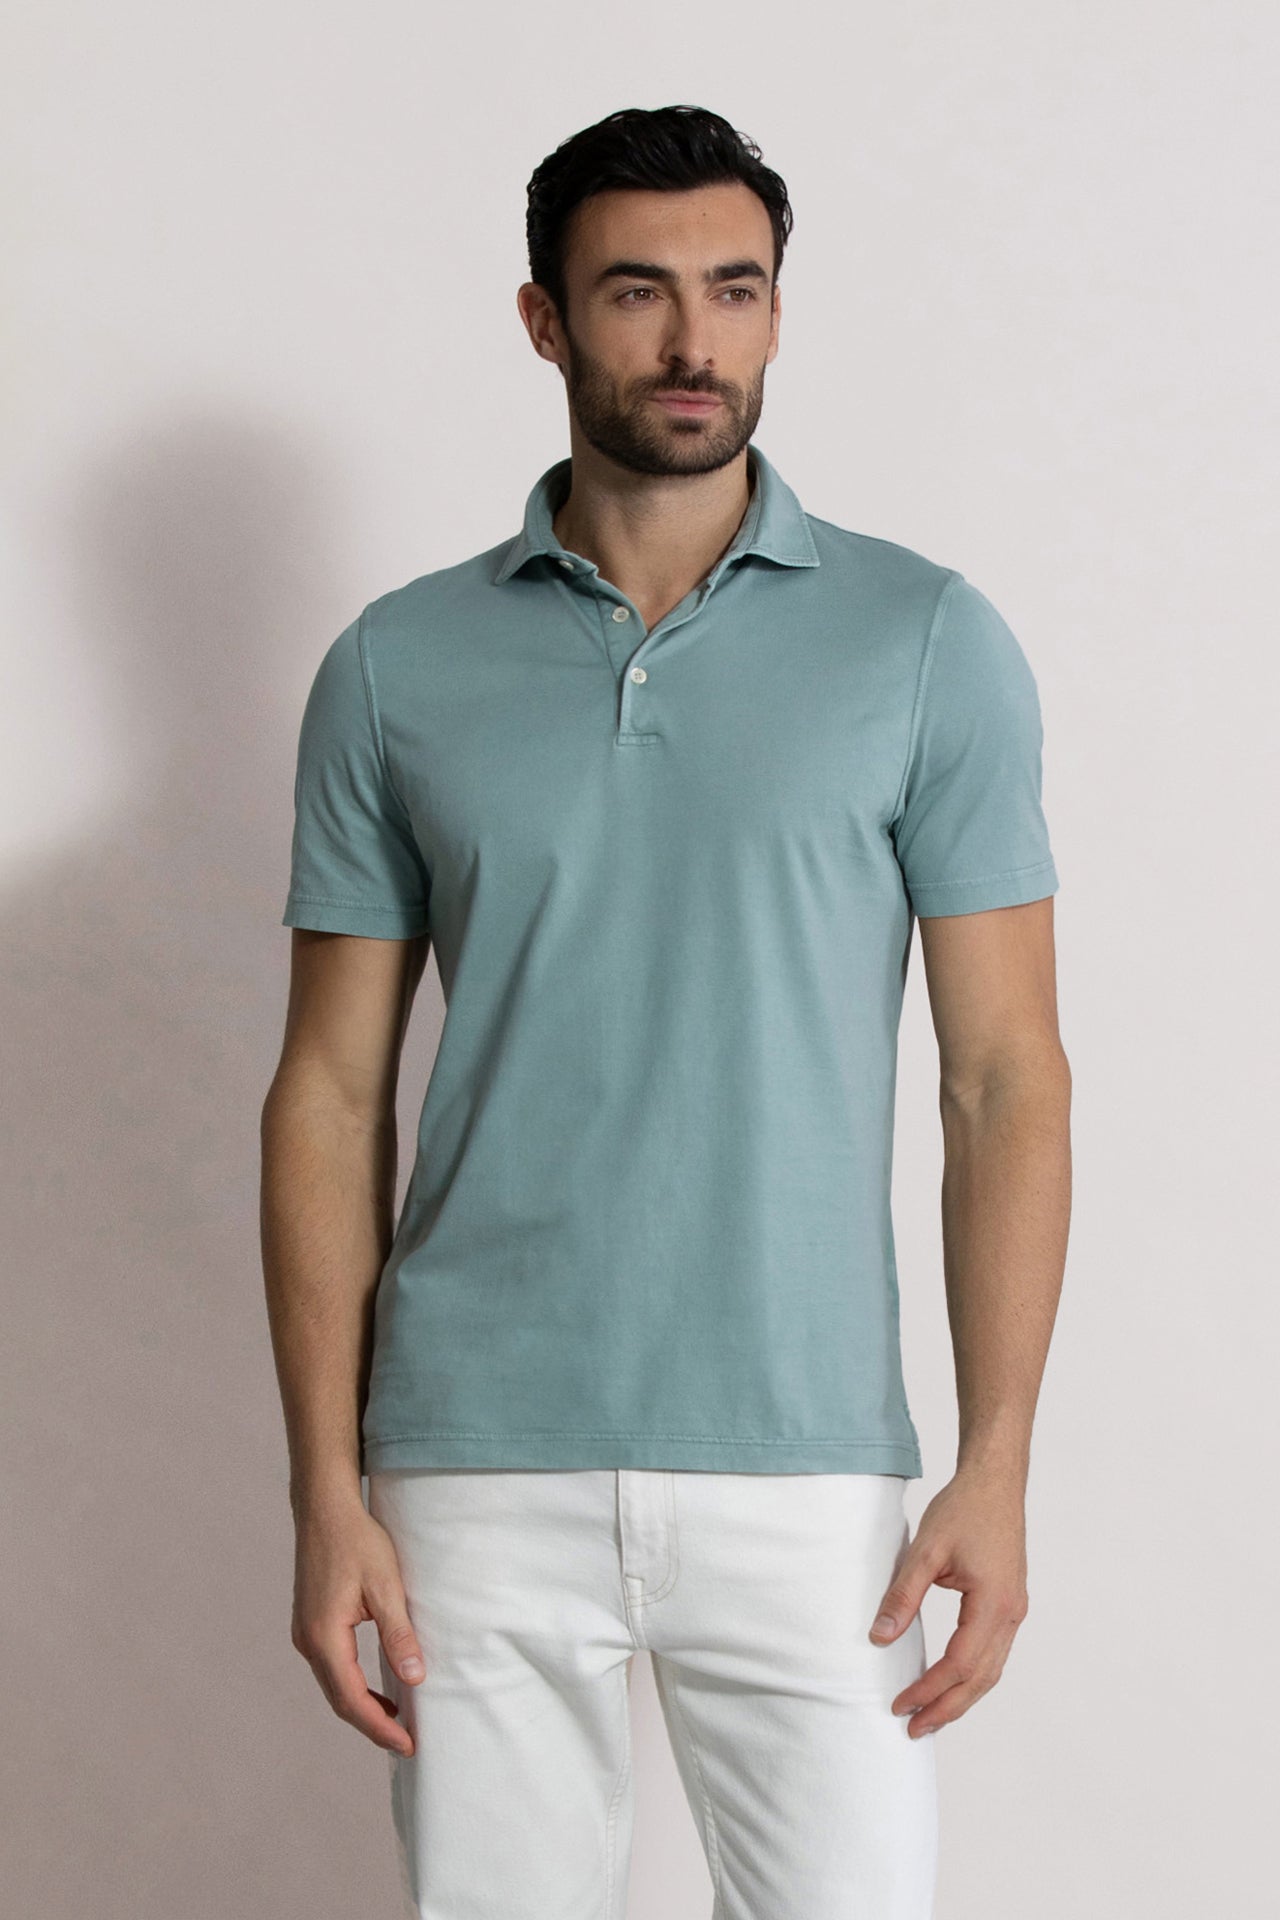 short sleeves polo t-shirt mint blue - front view